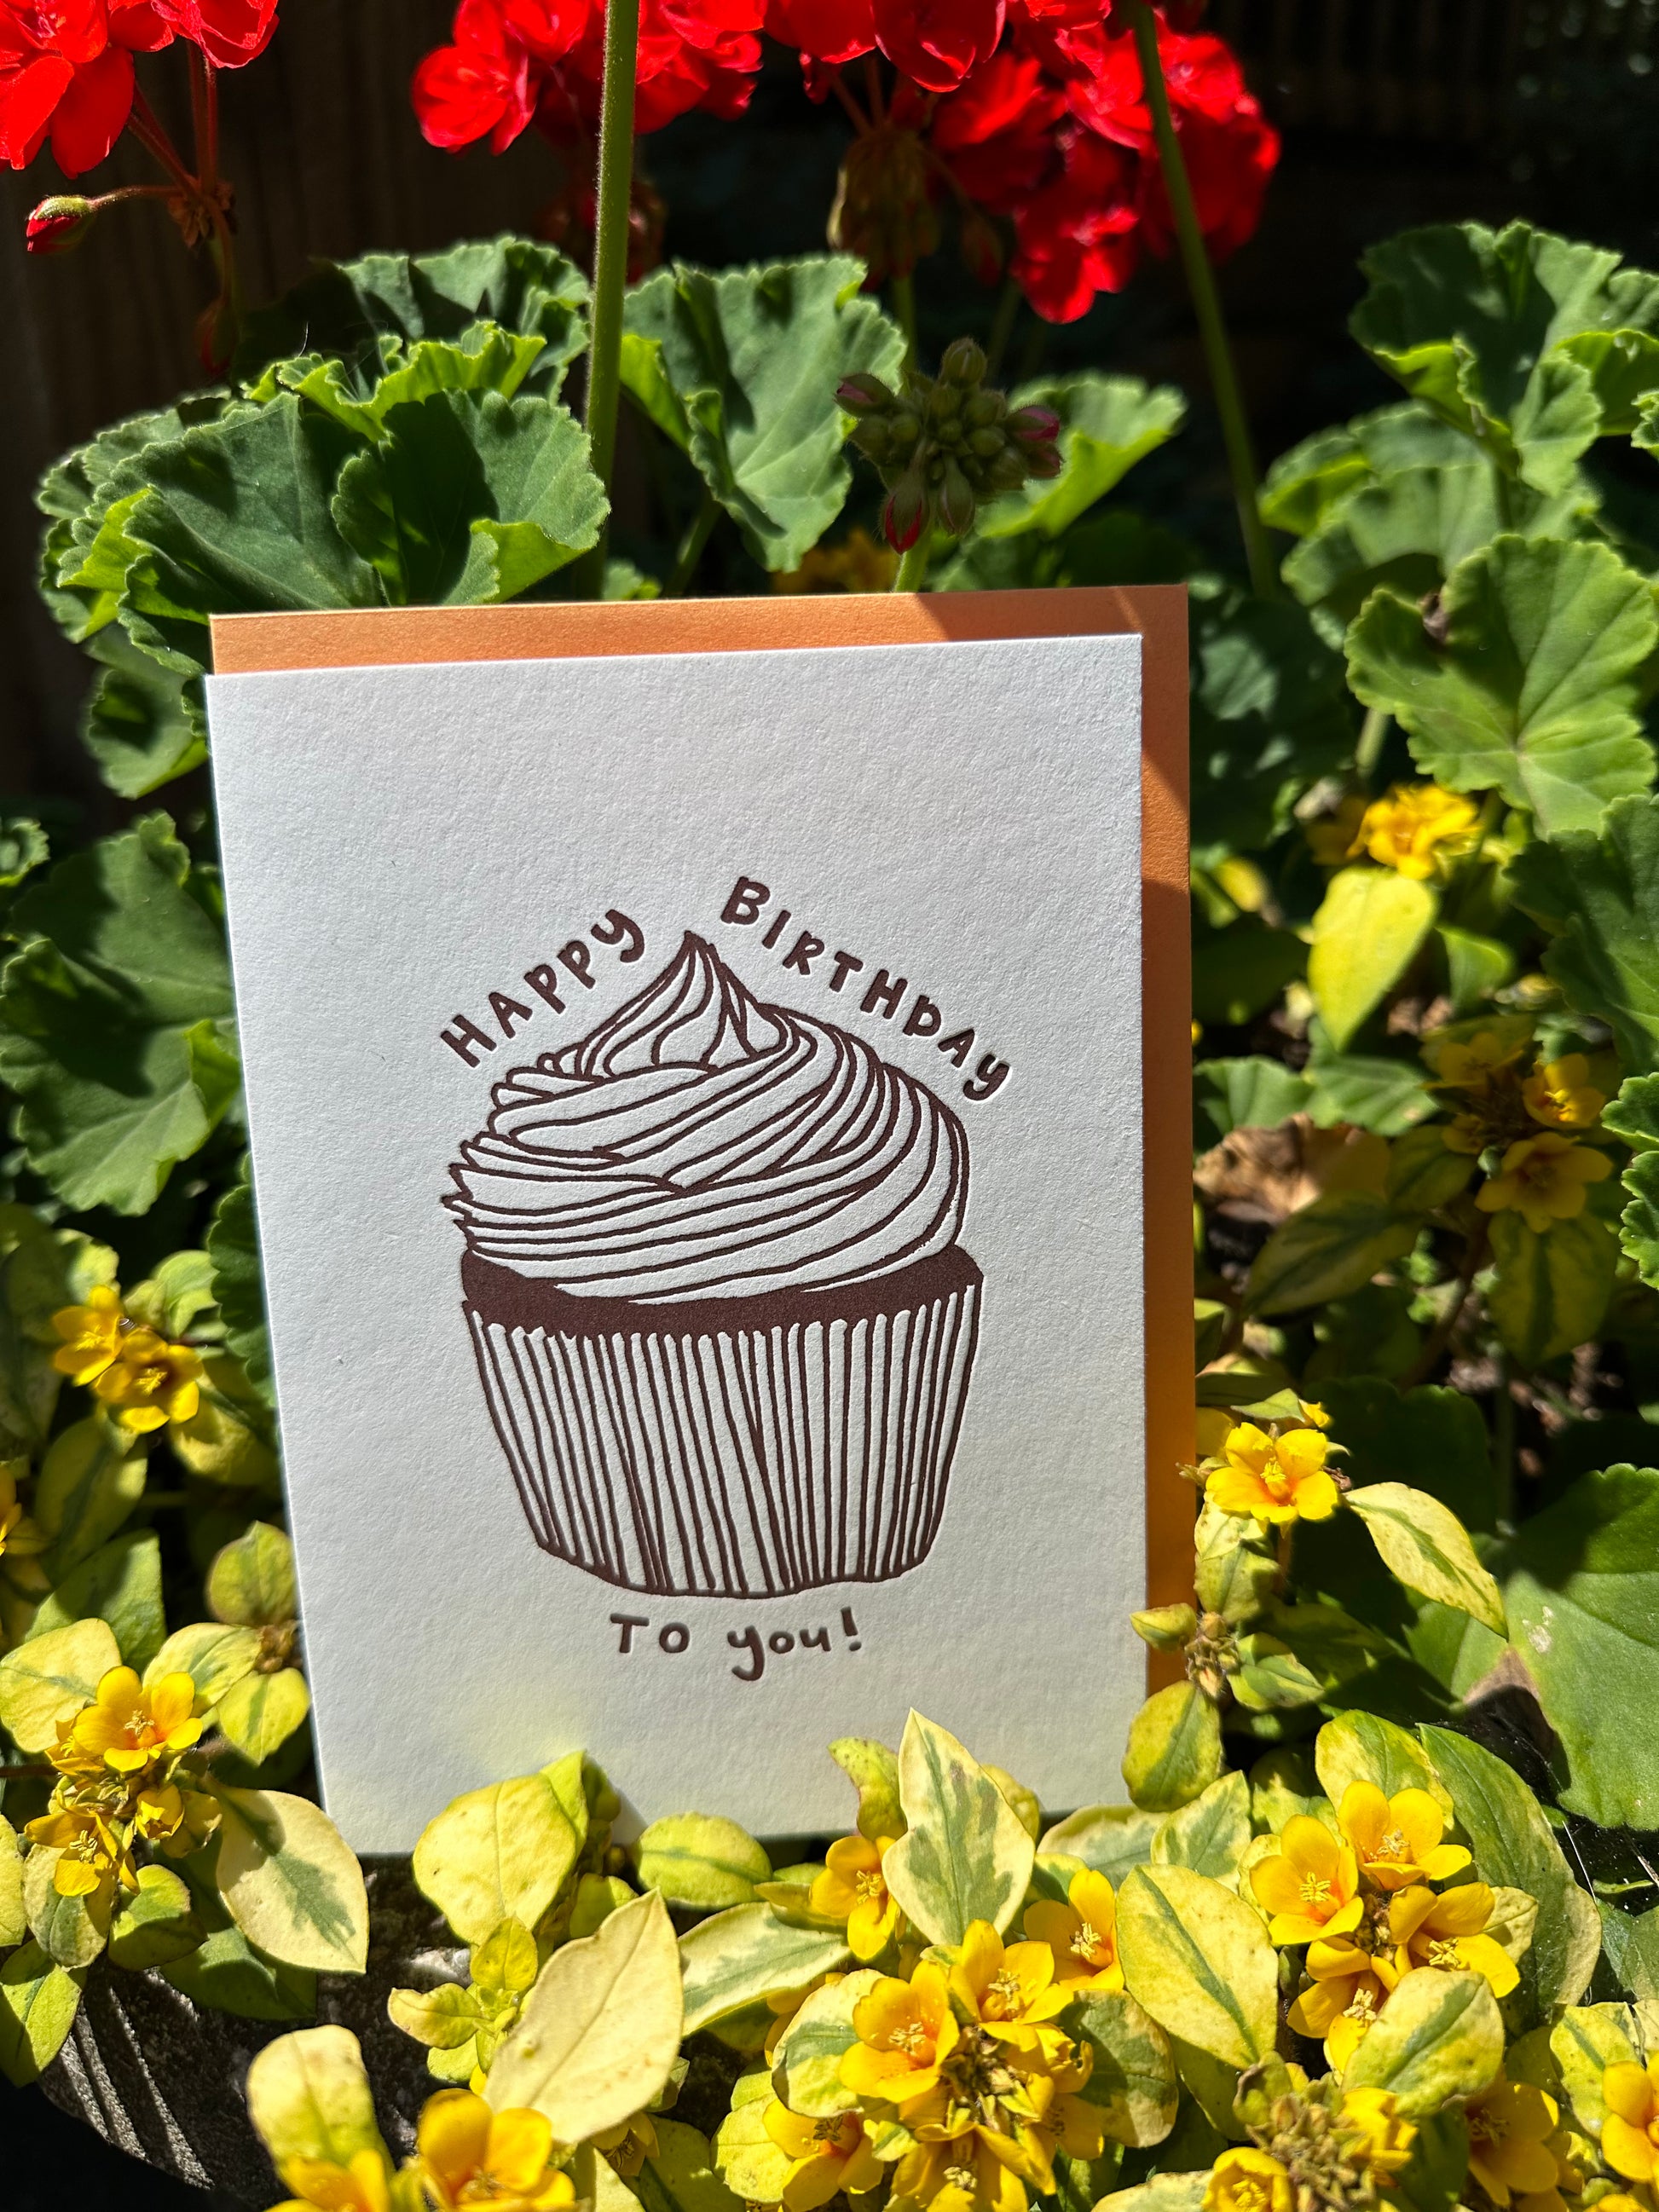 Letterpress greeting card featuring a hand-drawn cupcake printed in a chocolate brown ink. "Happy Birthday to you!" is written around the cupcake in a whimsical hand-drawn text, in the same brown ink. The card is white, blank inside, and is paired with a soft orange envelope. Card is shown with red geraniums and vining plant with yellow flowers, outside on a sunny summer day. 